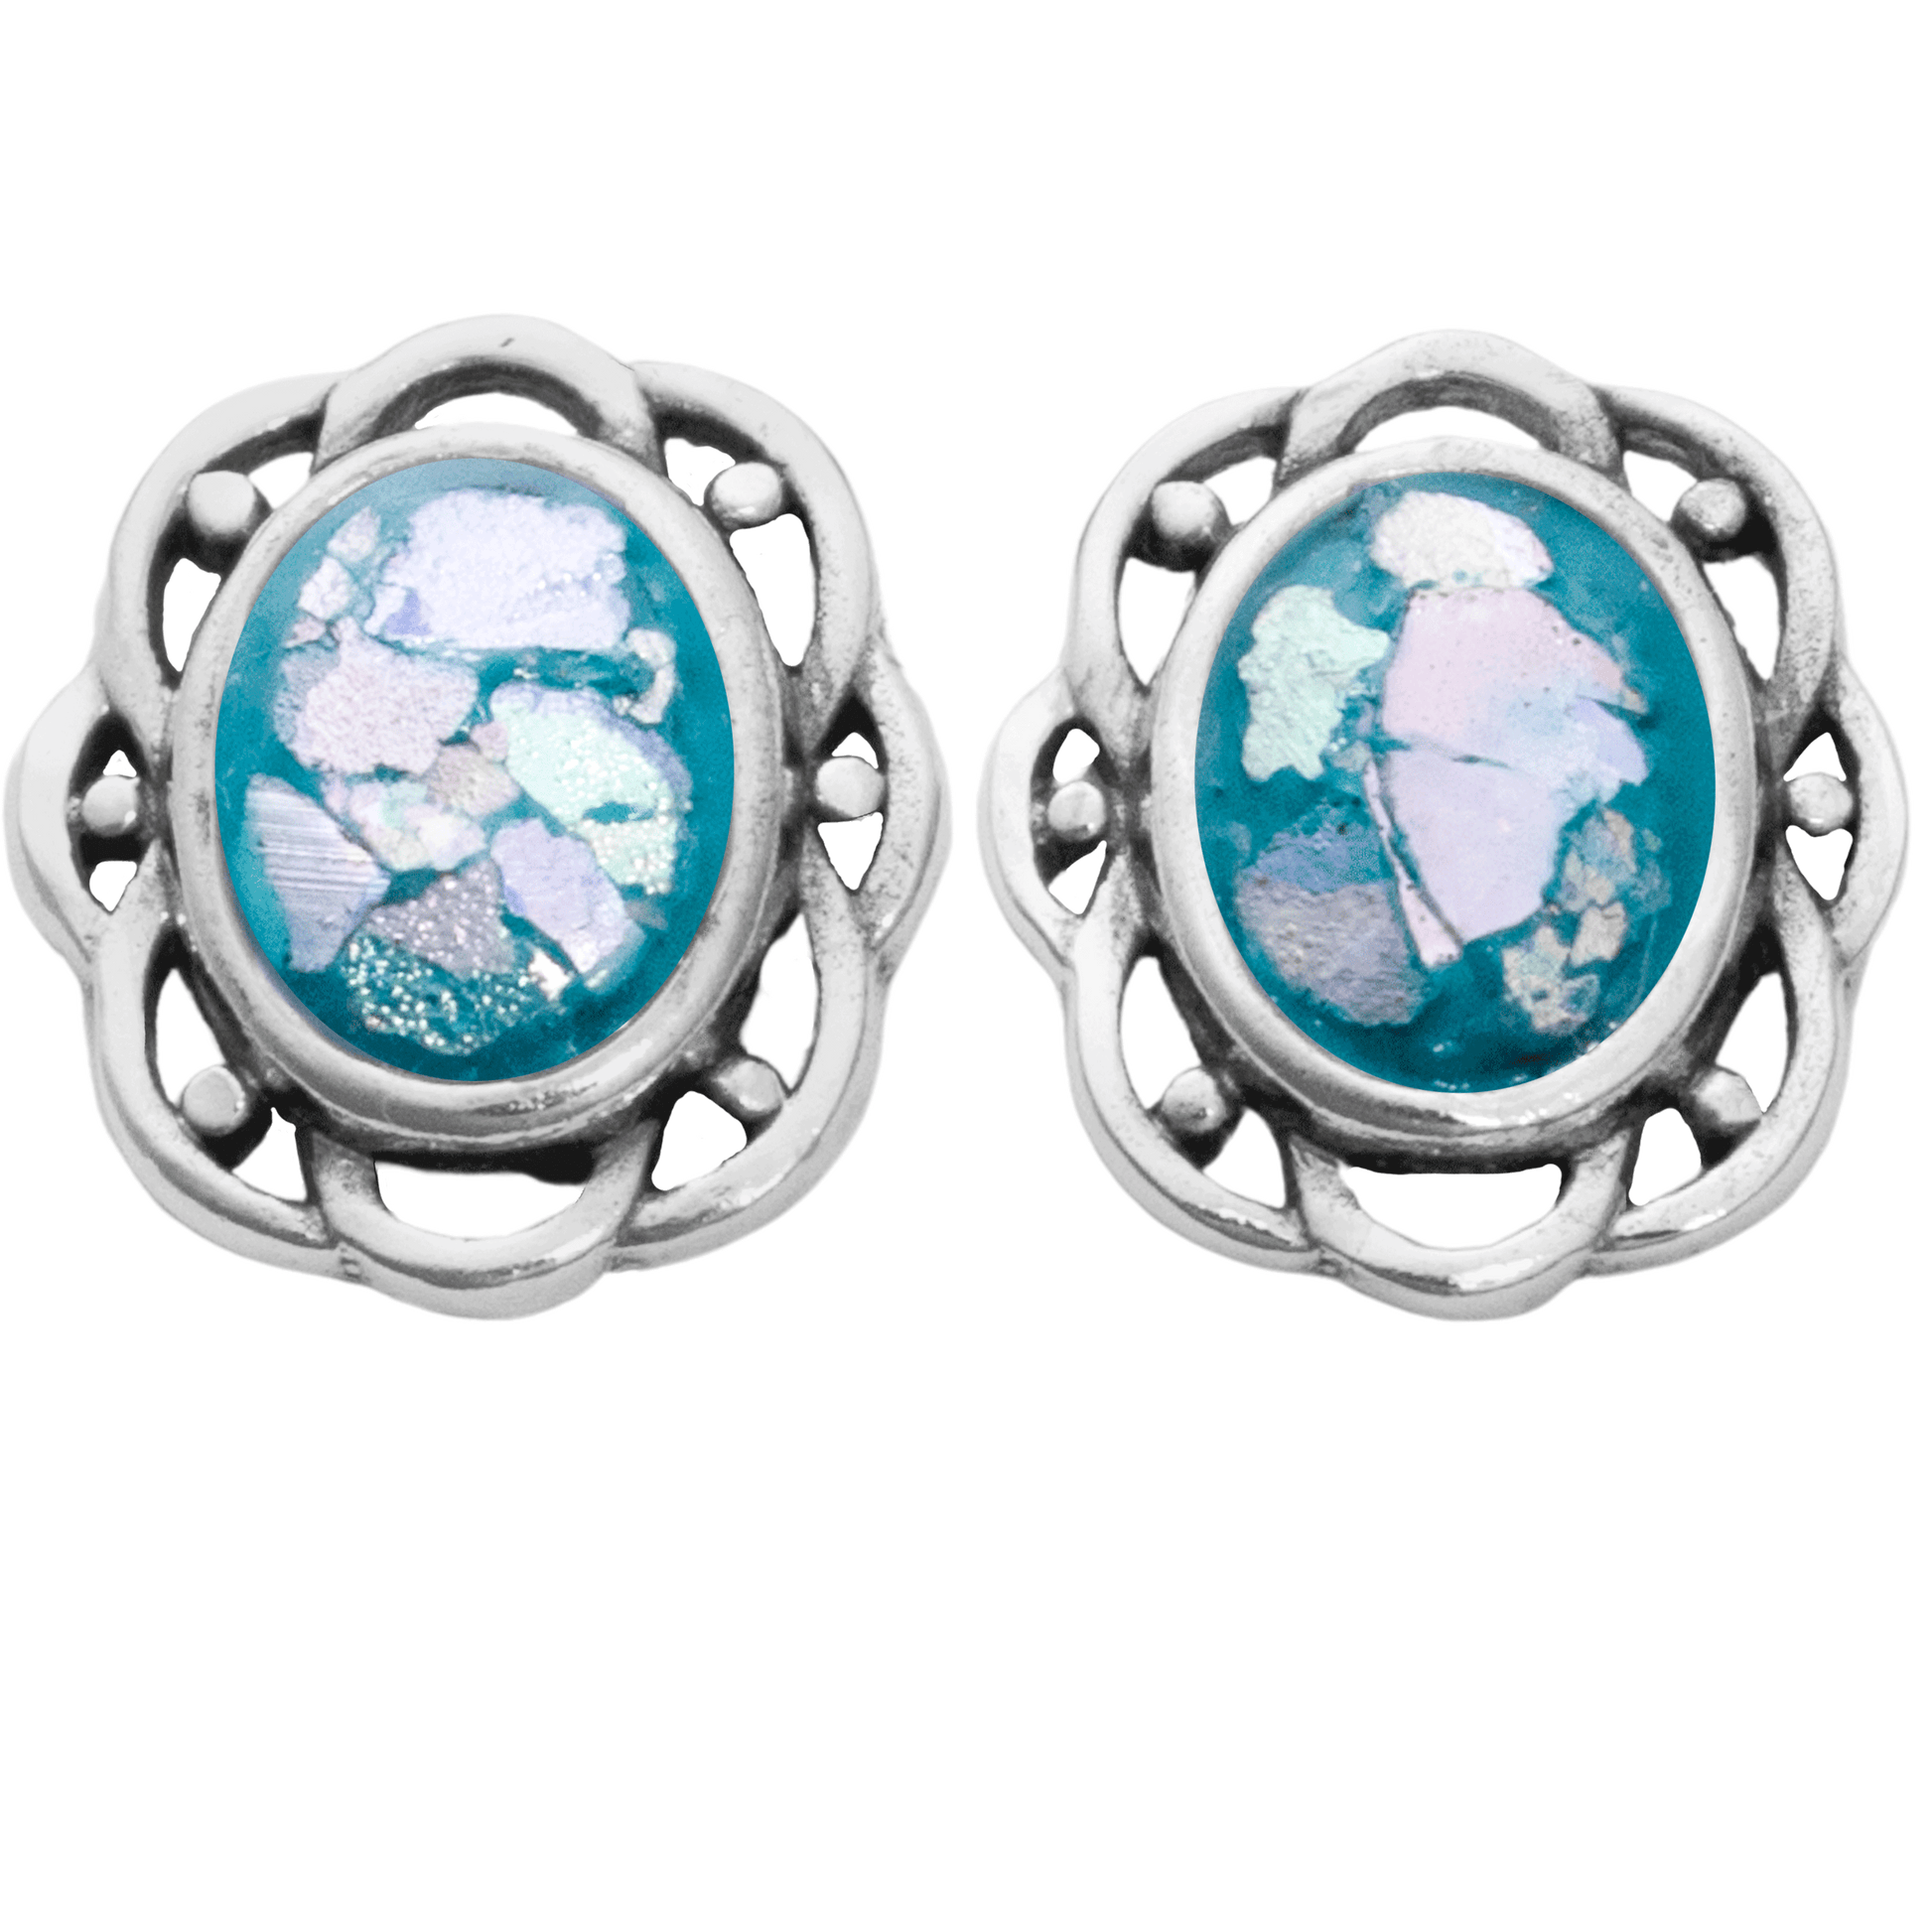 Oval-shaped stud earrings with multicolored roman glass in the center